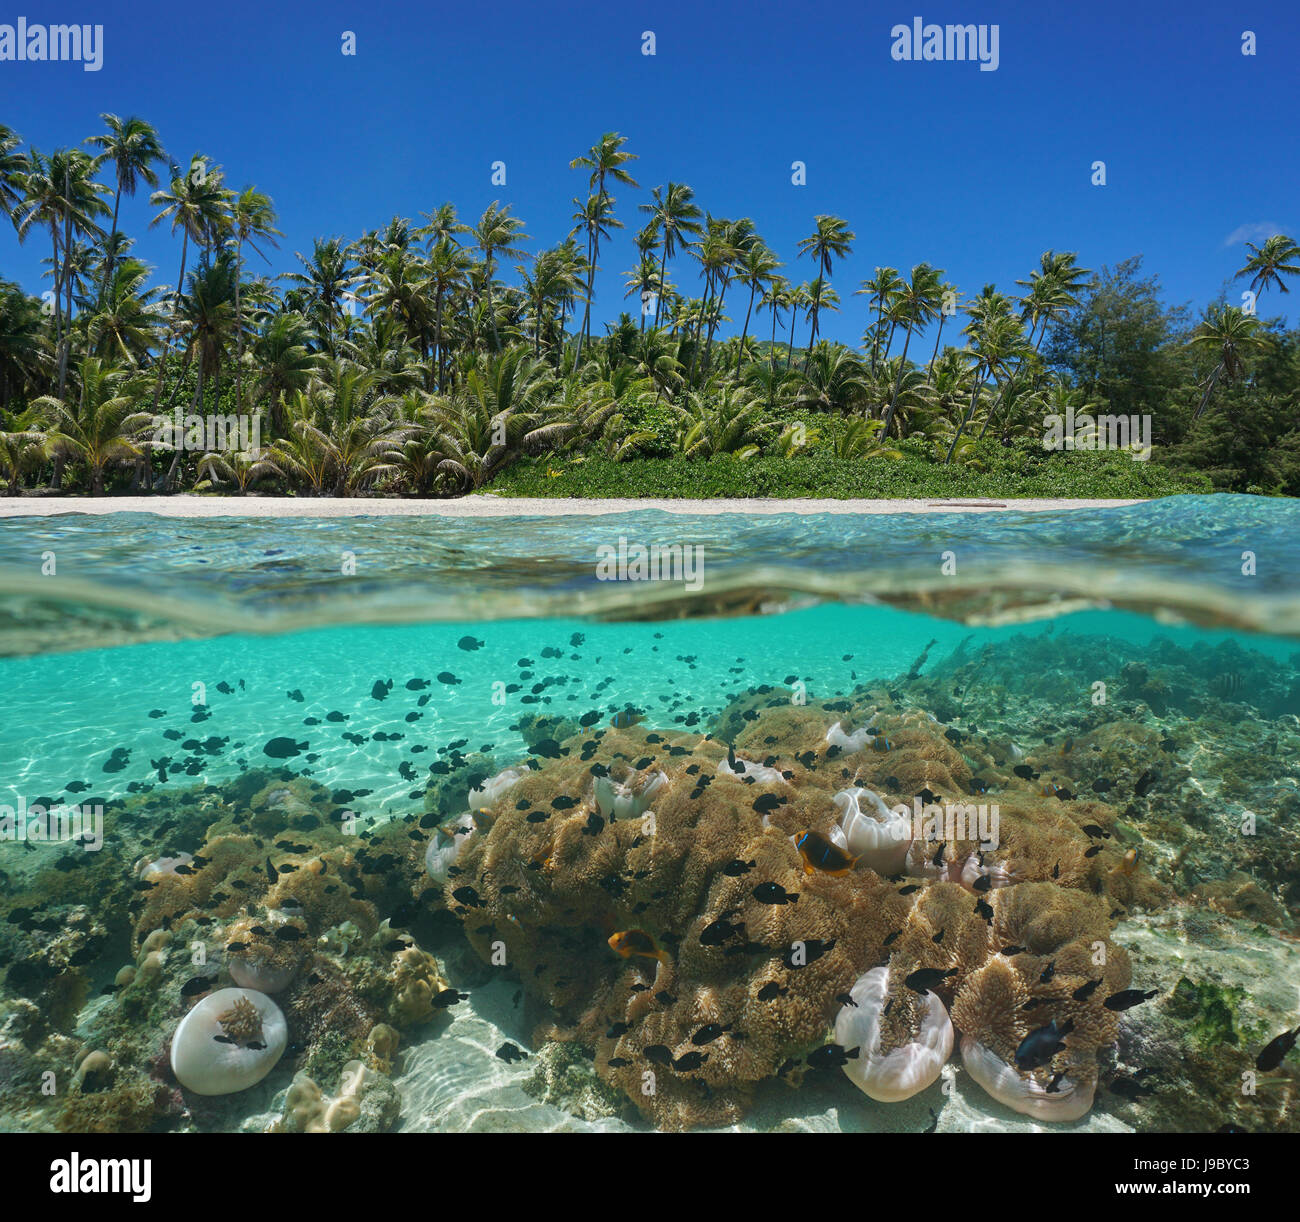 Tropical seashore over and under water surface with coconut trees and many sea anemones with fish underwater, Huahine, Pacific ocean, French Polynesia Stock Photo